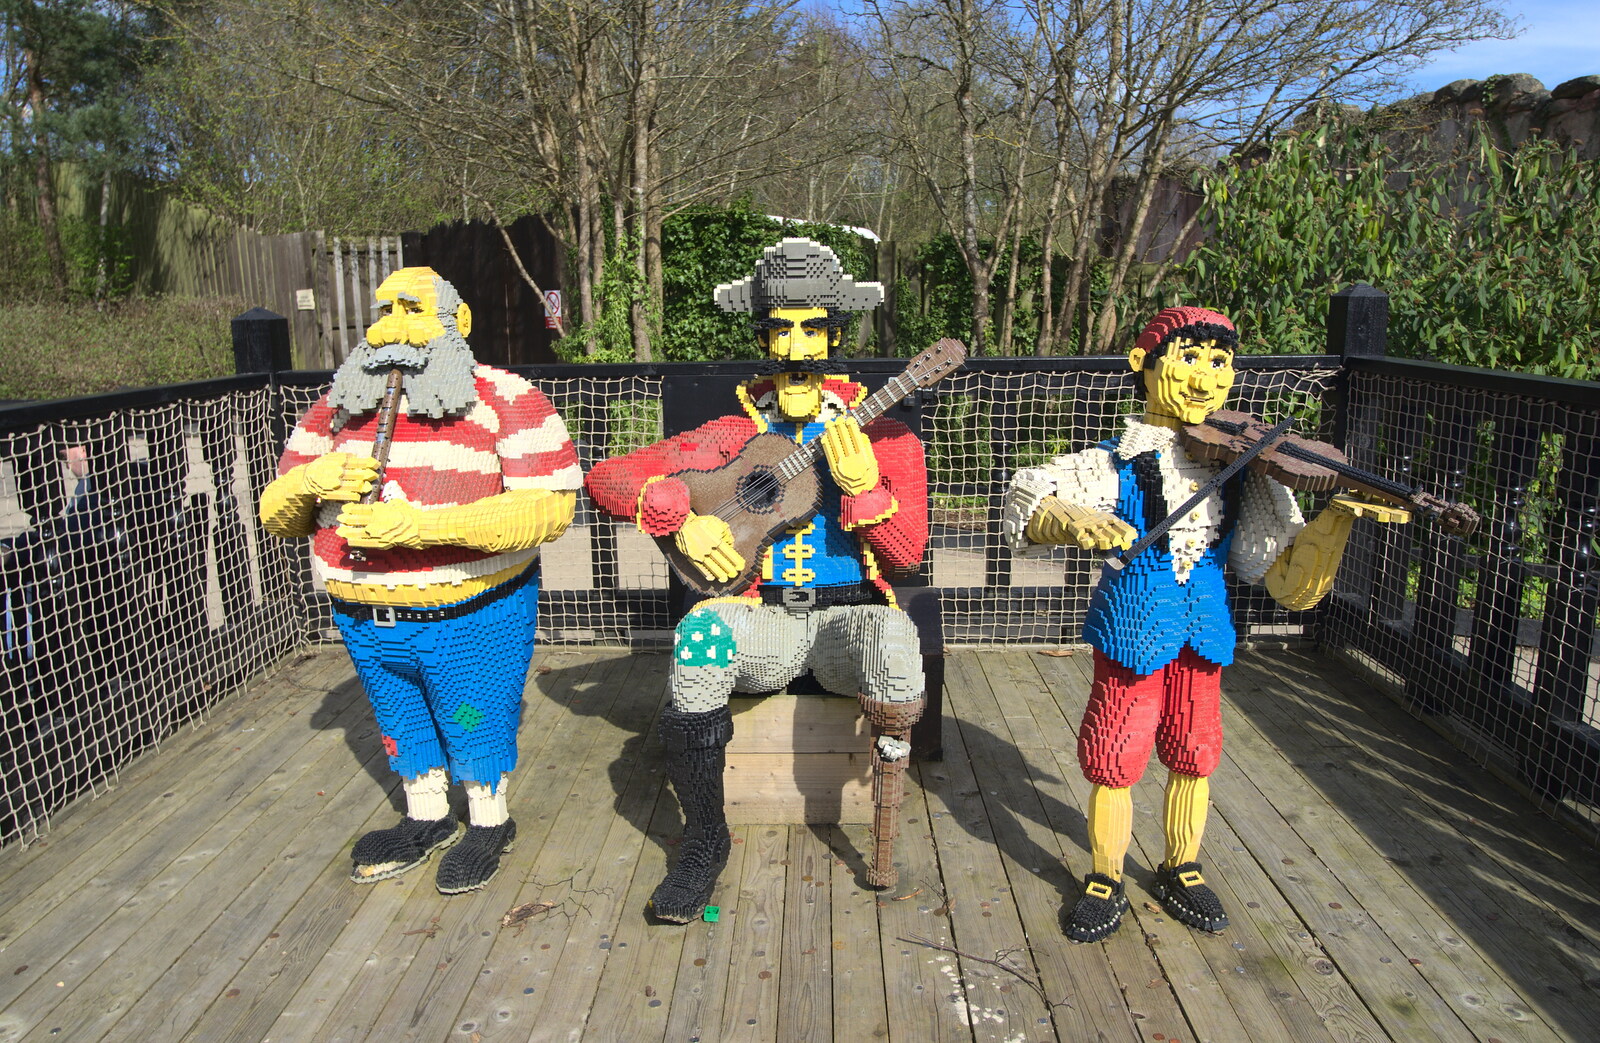 A Lego band from A Trip to Legoland, Windsor, Berkshire - 25th March 2017